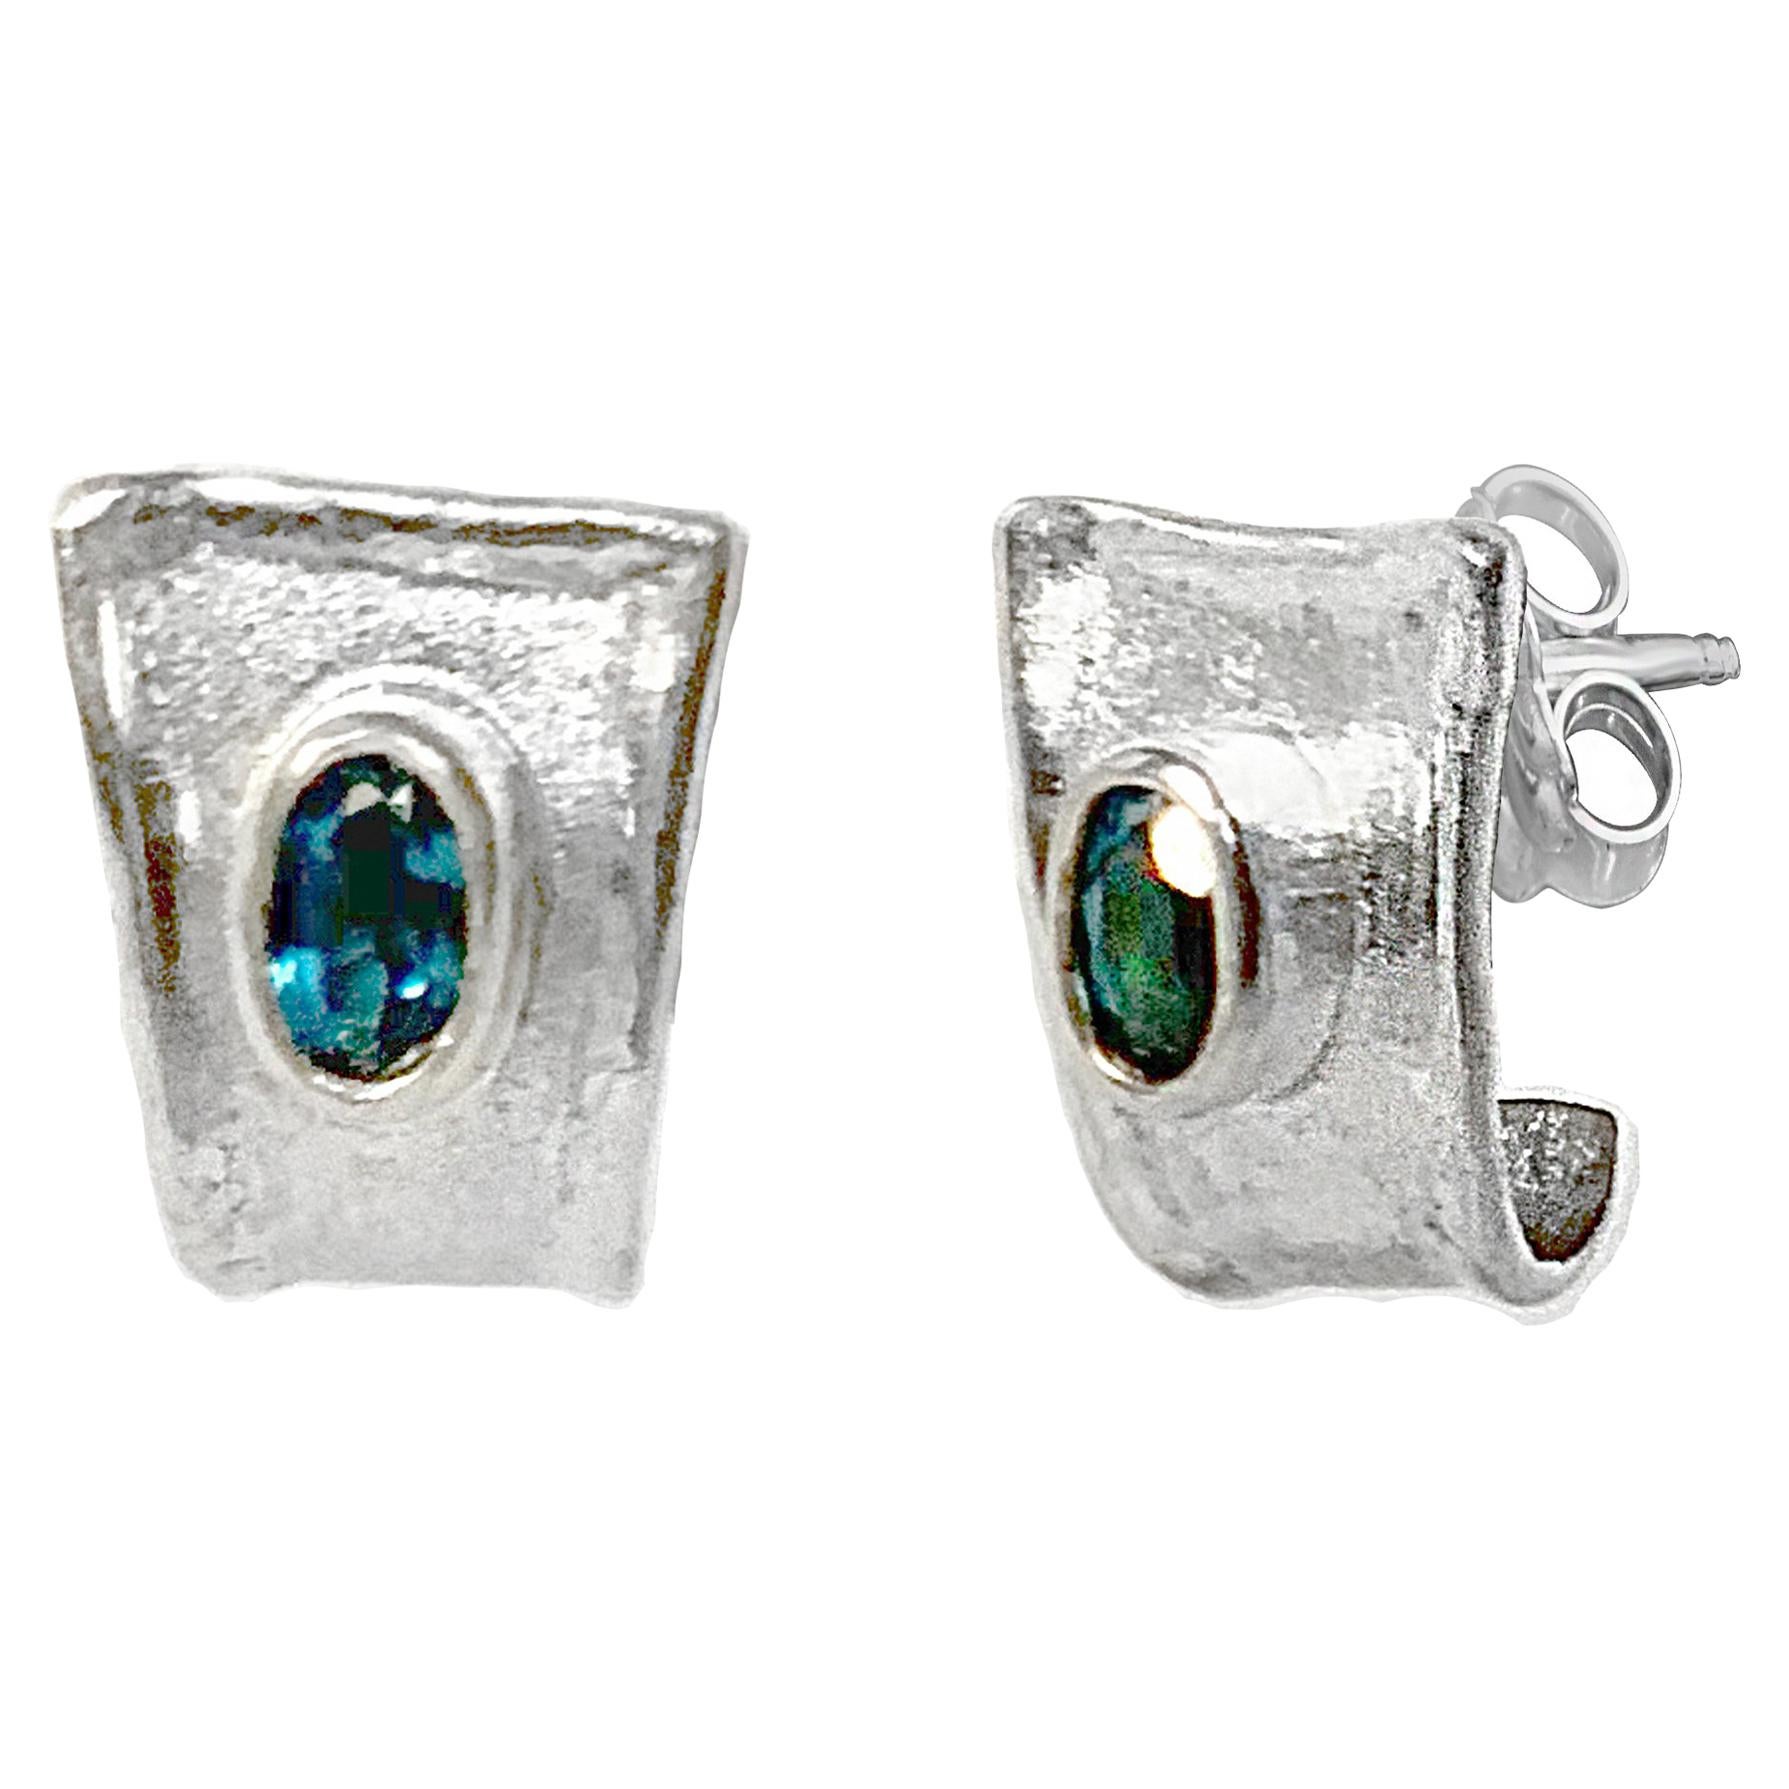 Yianni Creations 1.14 Carat Blue Topaz in Fine Silver and Palladium Earrings 2